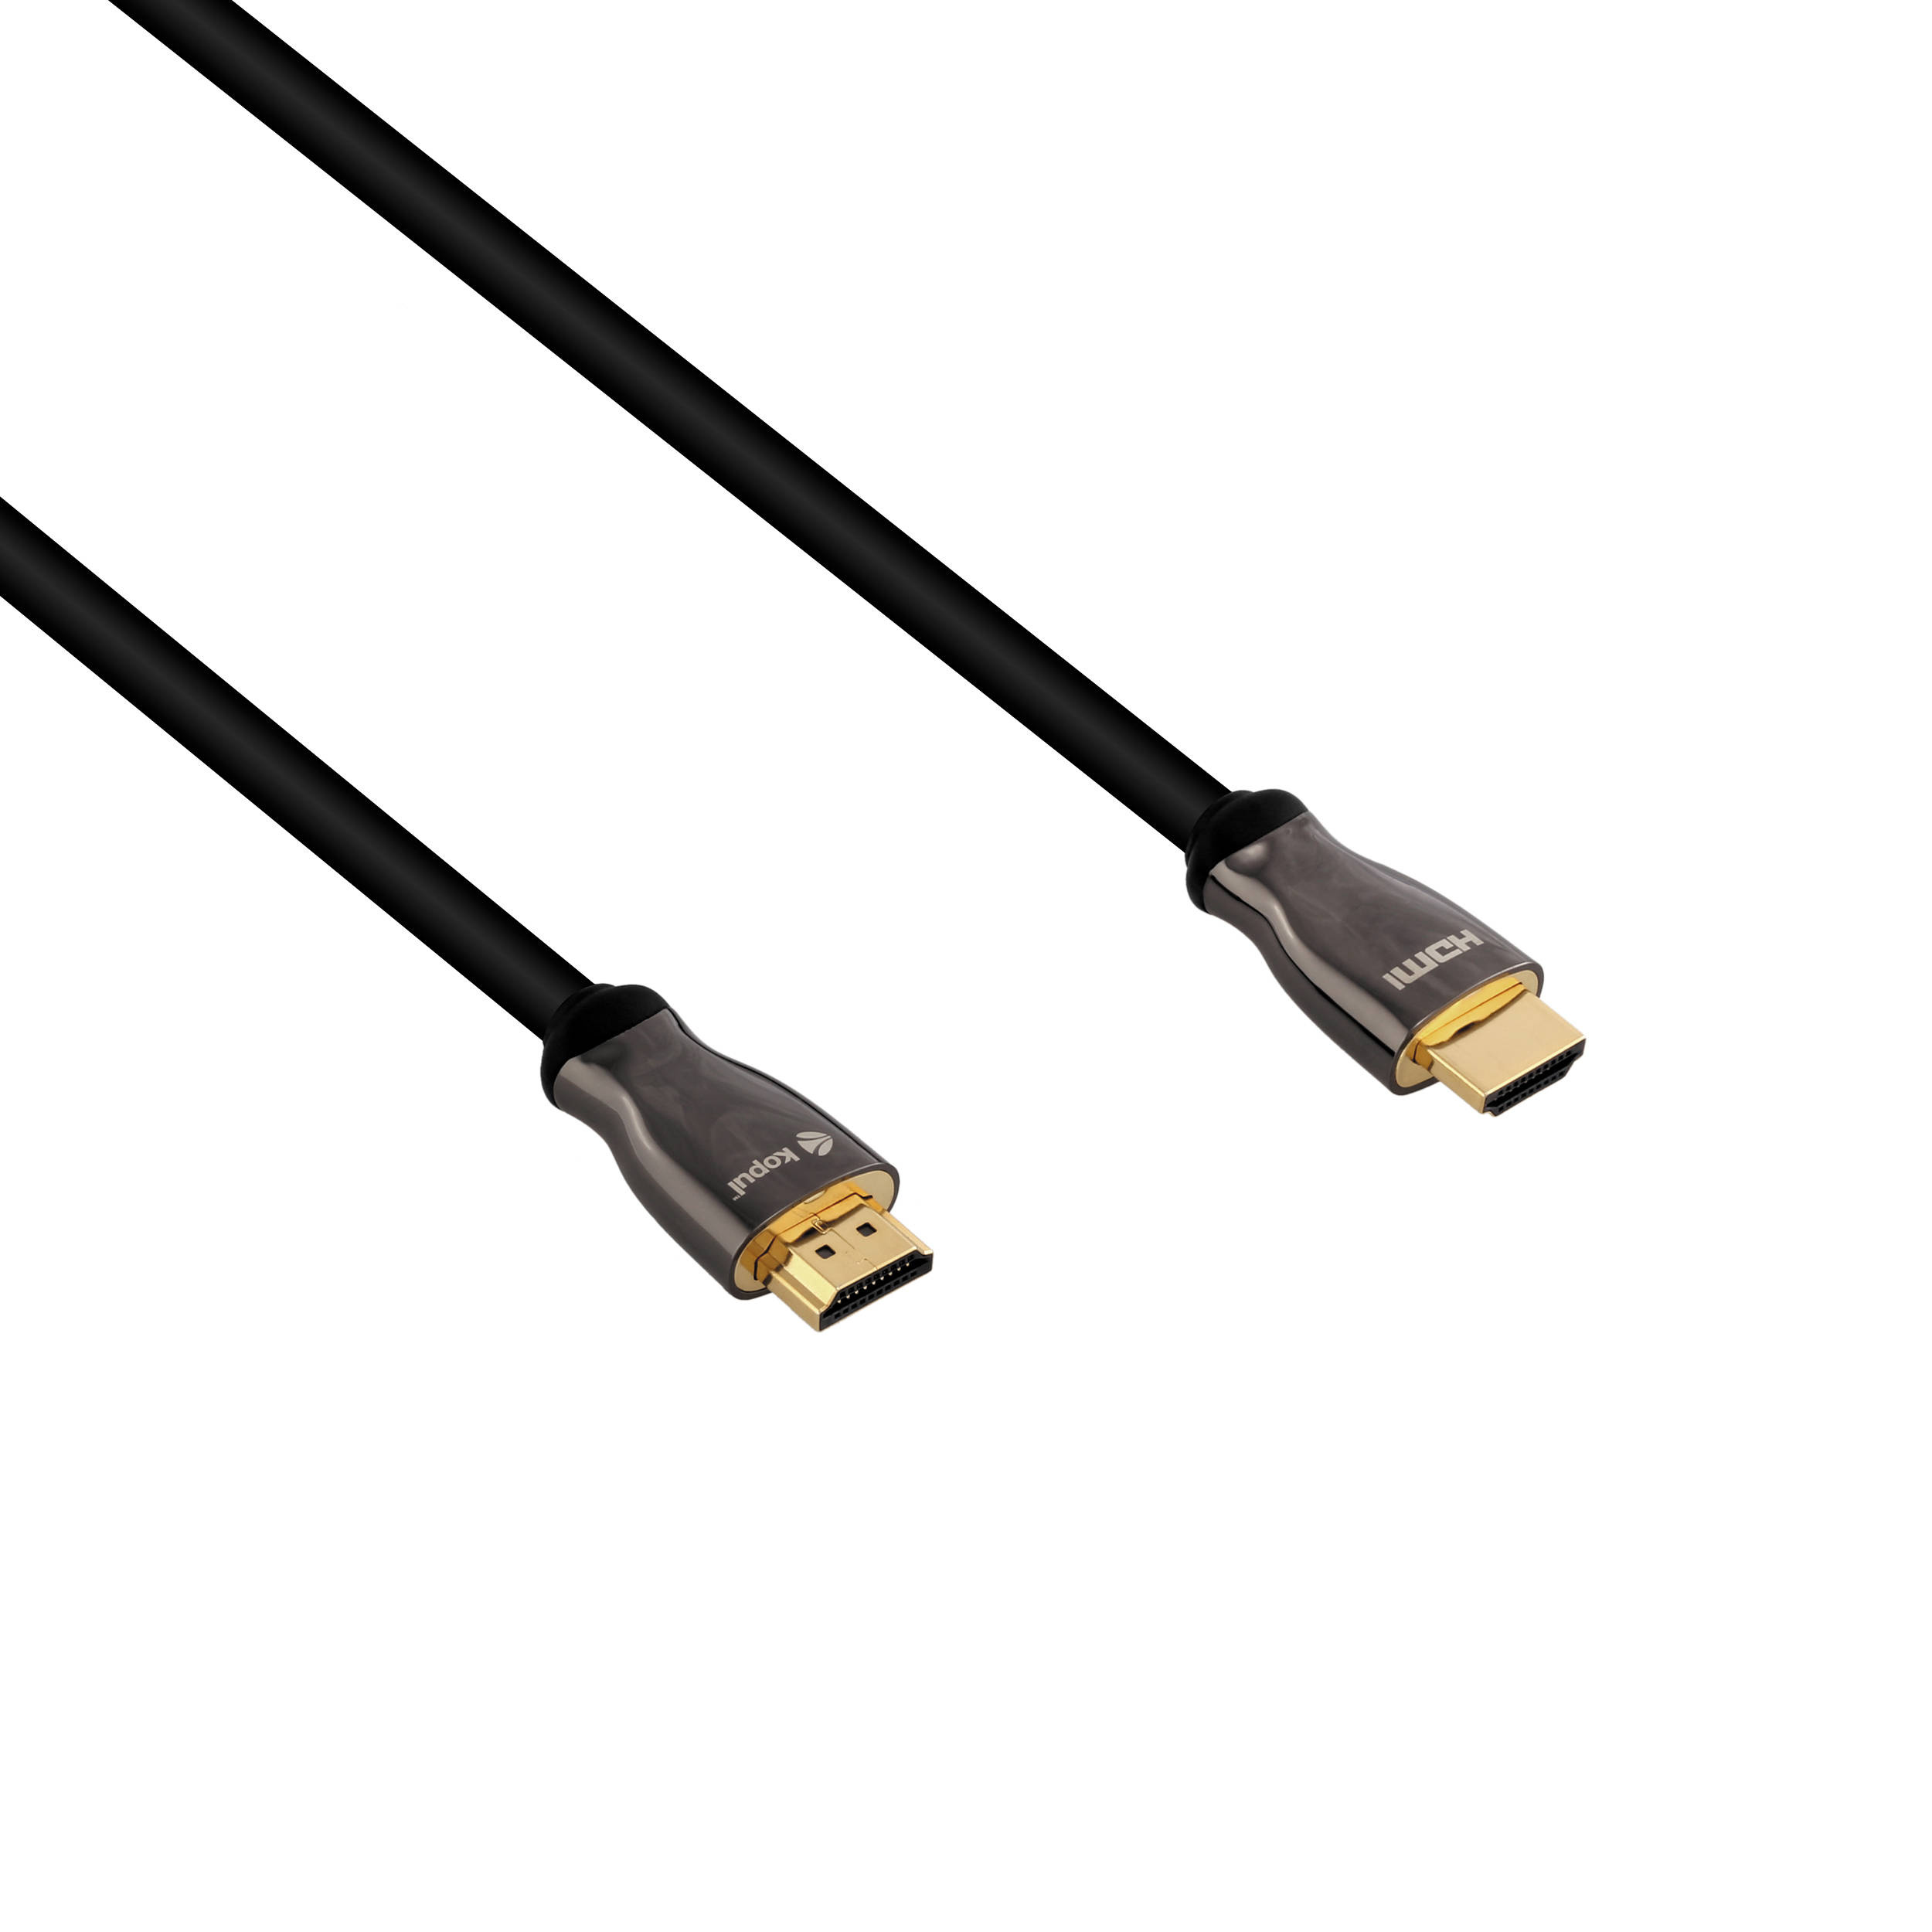 Kopul HDA-510 Premium High-Speed HDMI Cable with Ethernet (10')